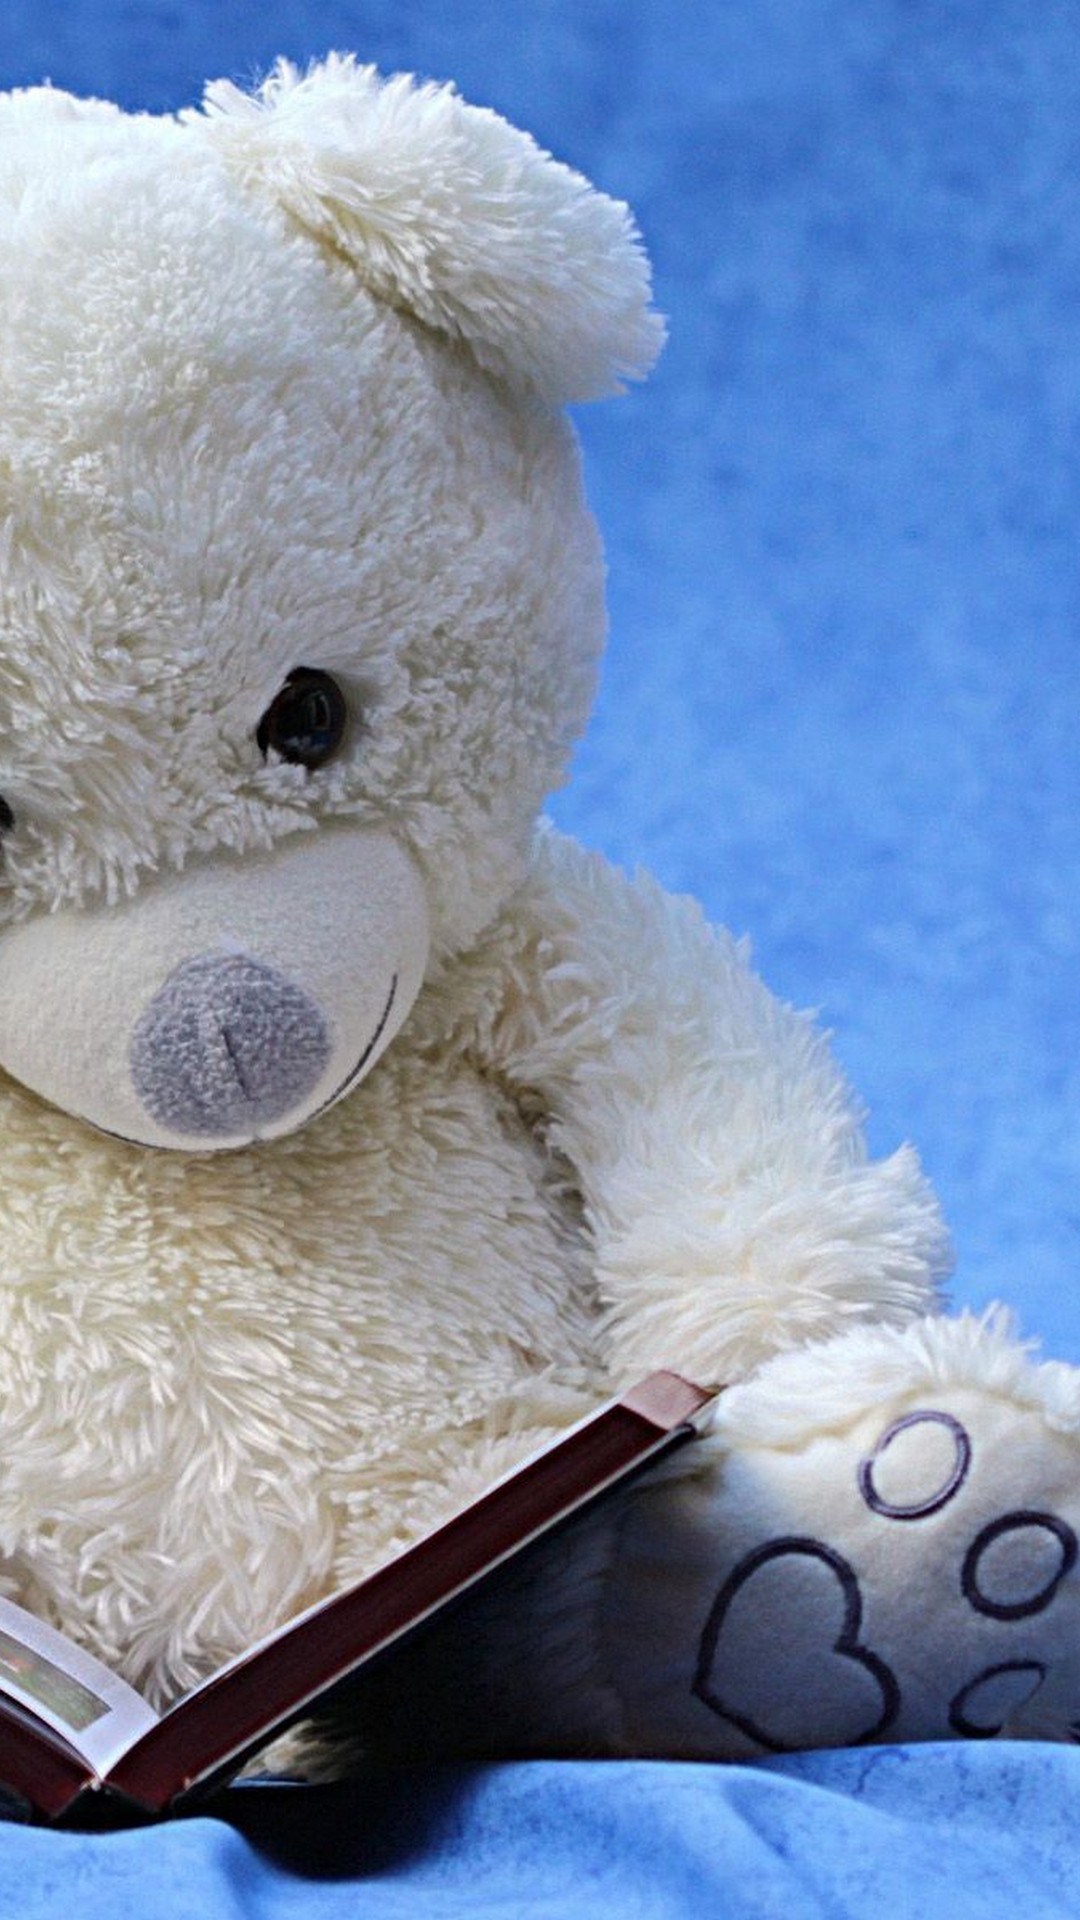 Wallpaper Iphone Teddy Bear Giant With Image Resolution - Teddy Wallpaper For Iphone - HD Wallpaper 